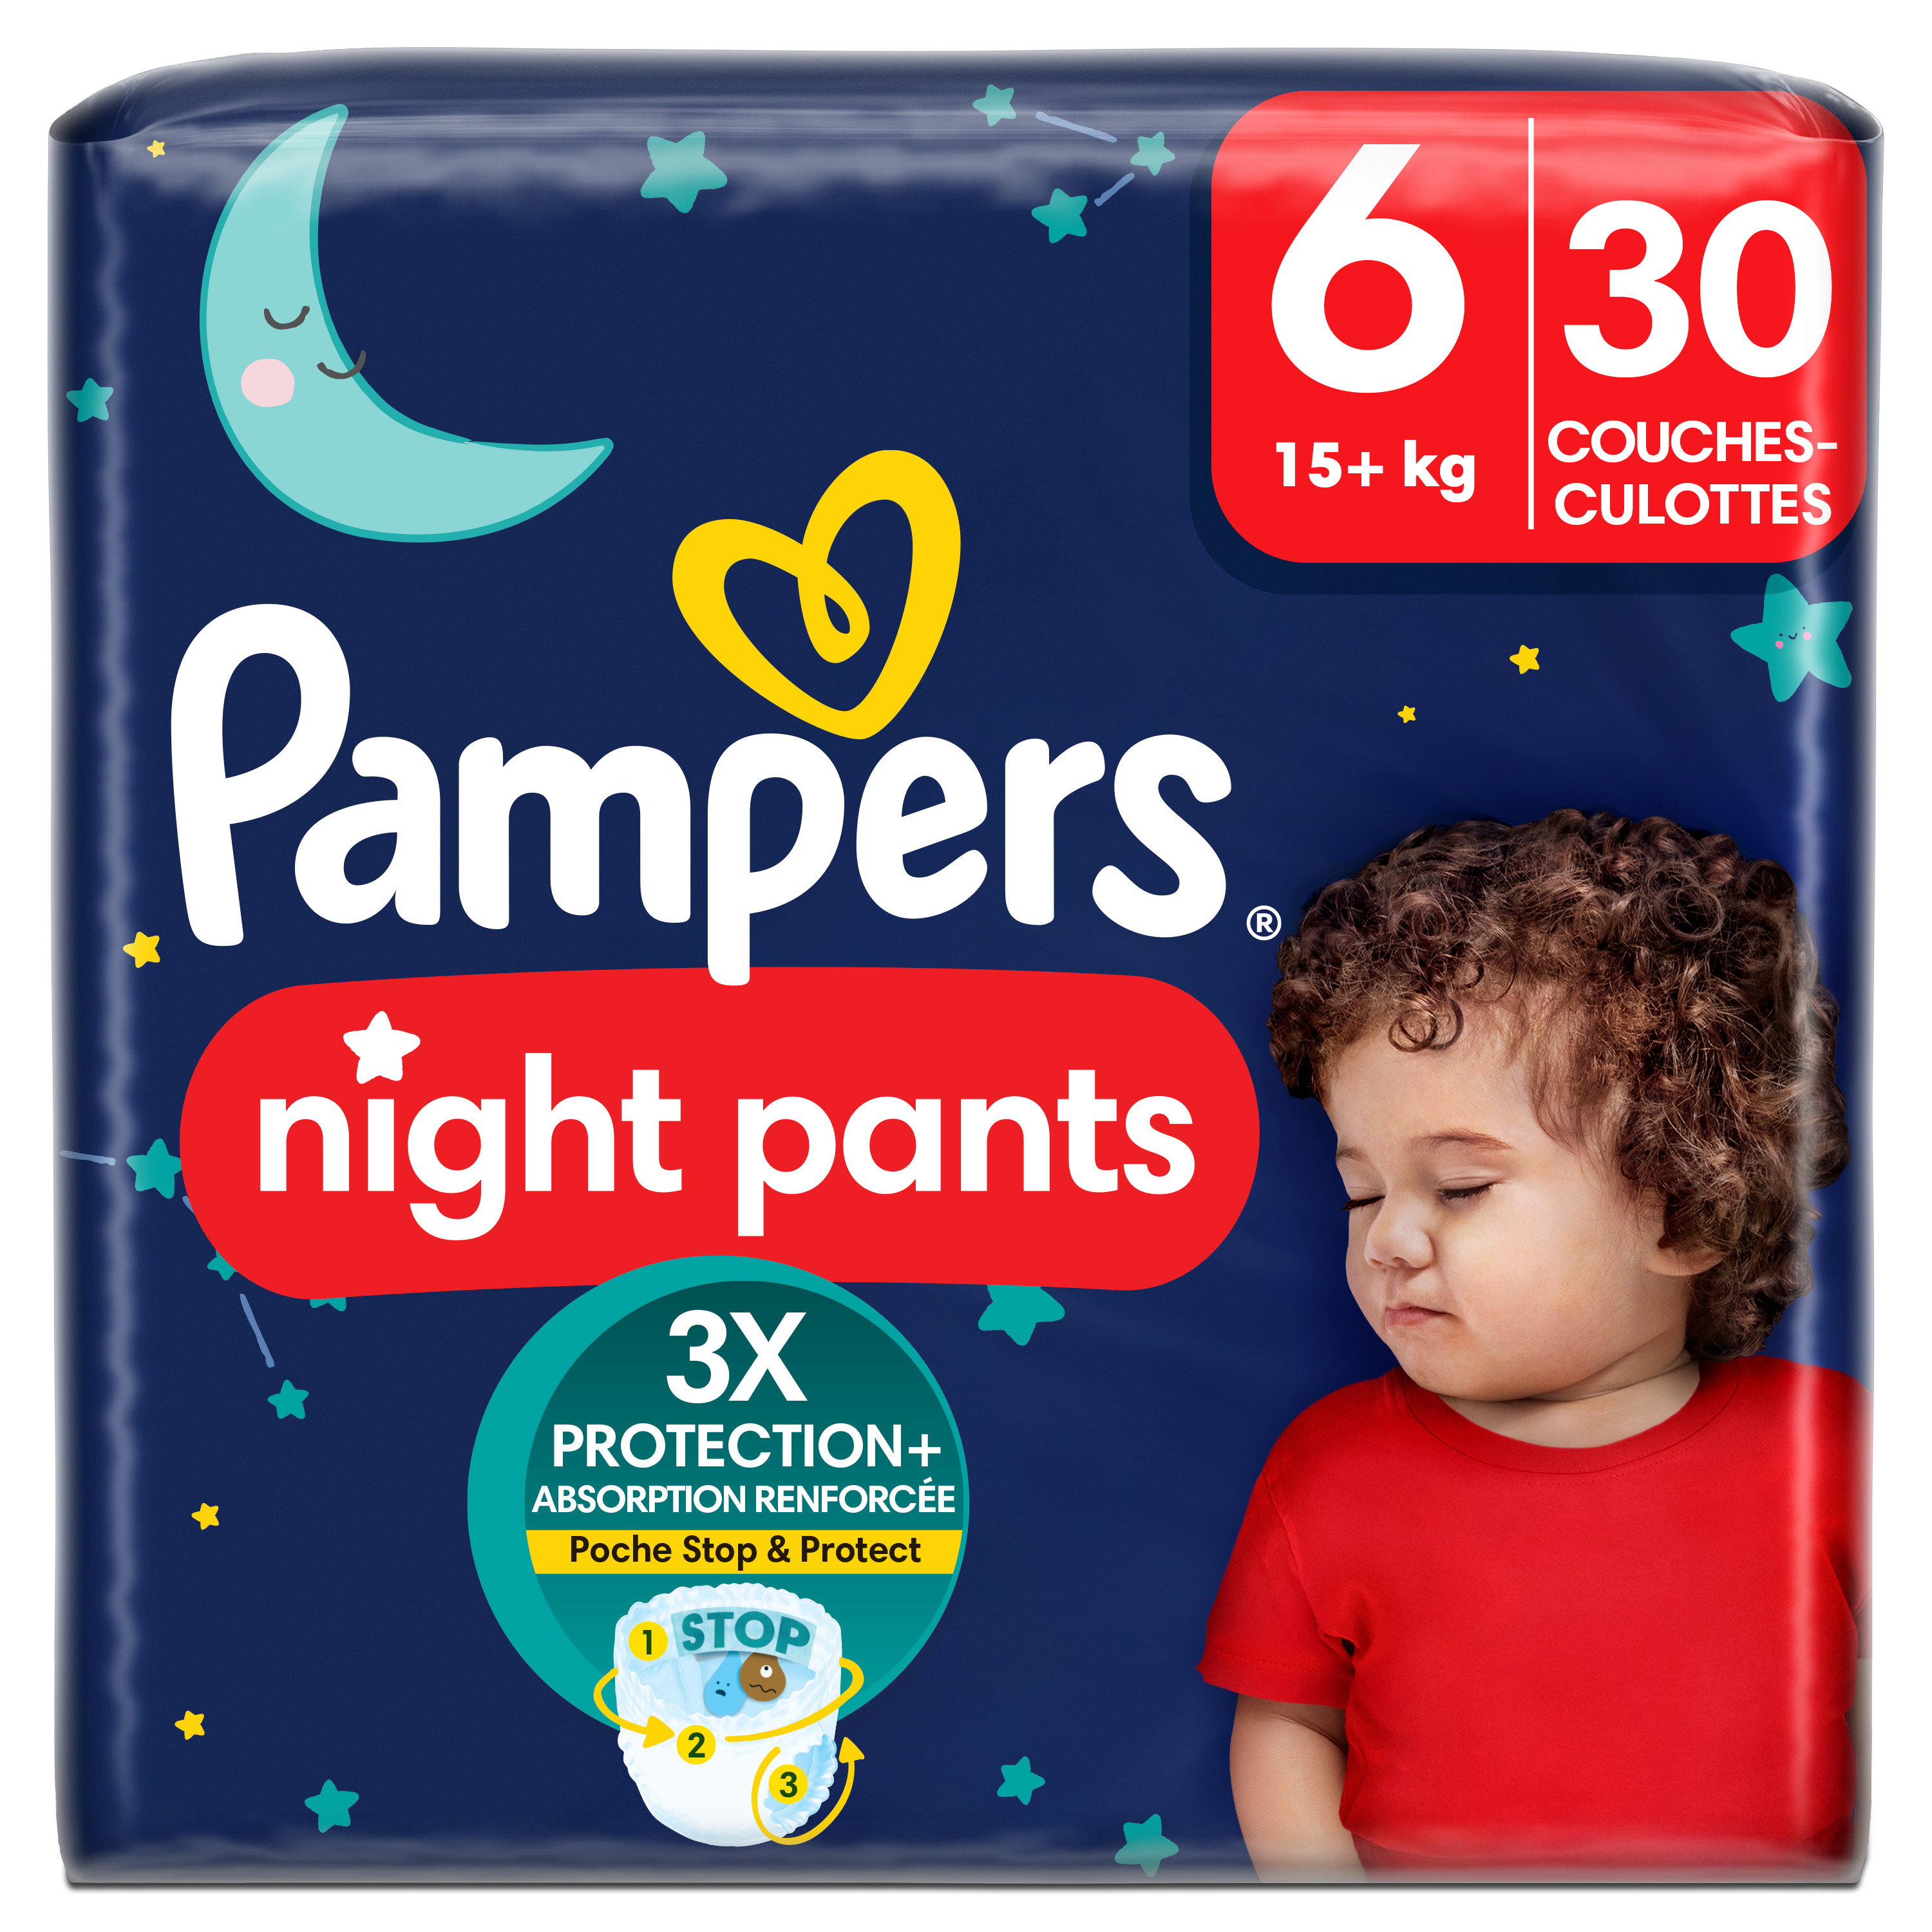 PAMPERS Baby-dry night couche-culotte taille 6 (+15kg) 30 couches pas cher  